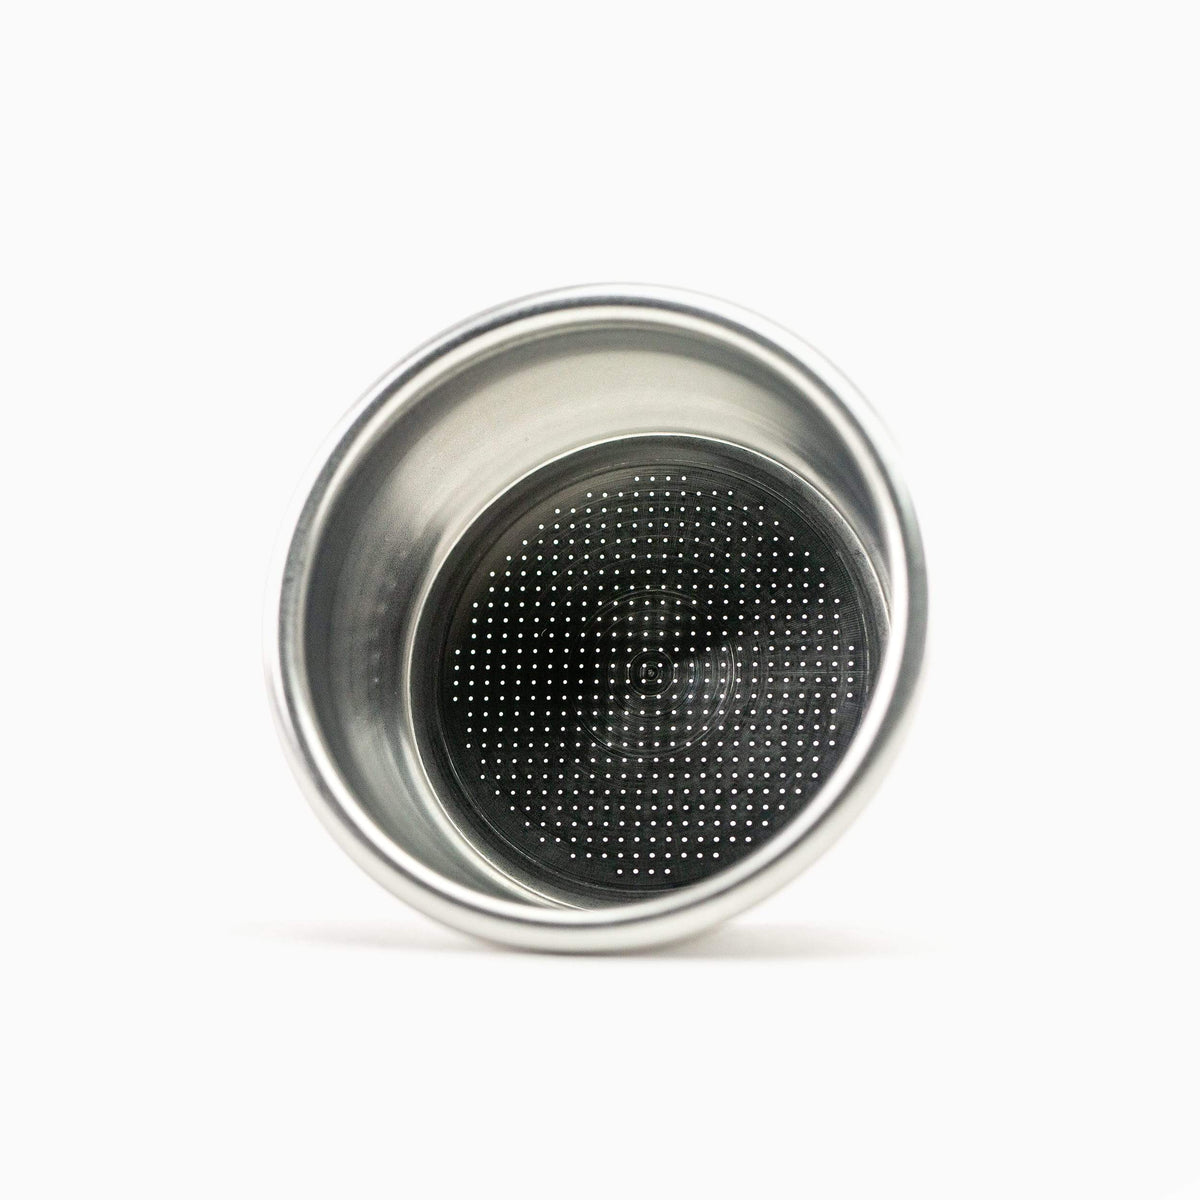 Crema Coffee Products 54mm Portafilter Baskets for Breville/Sage